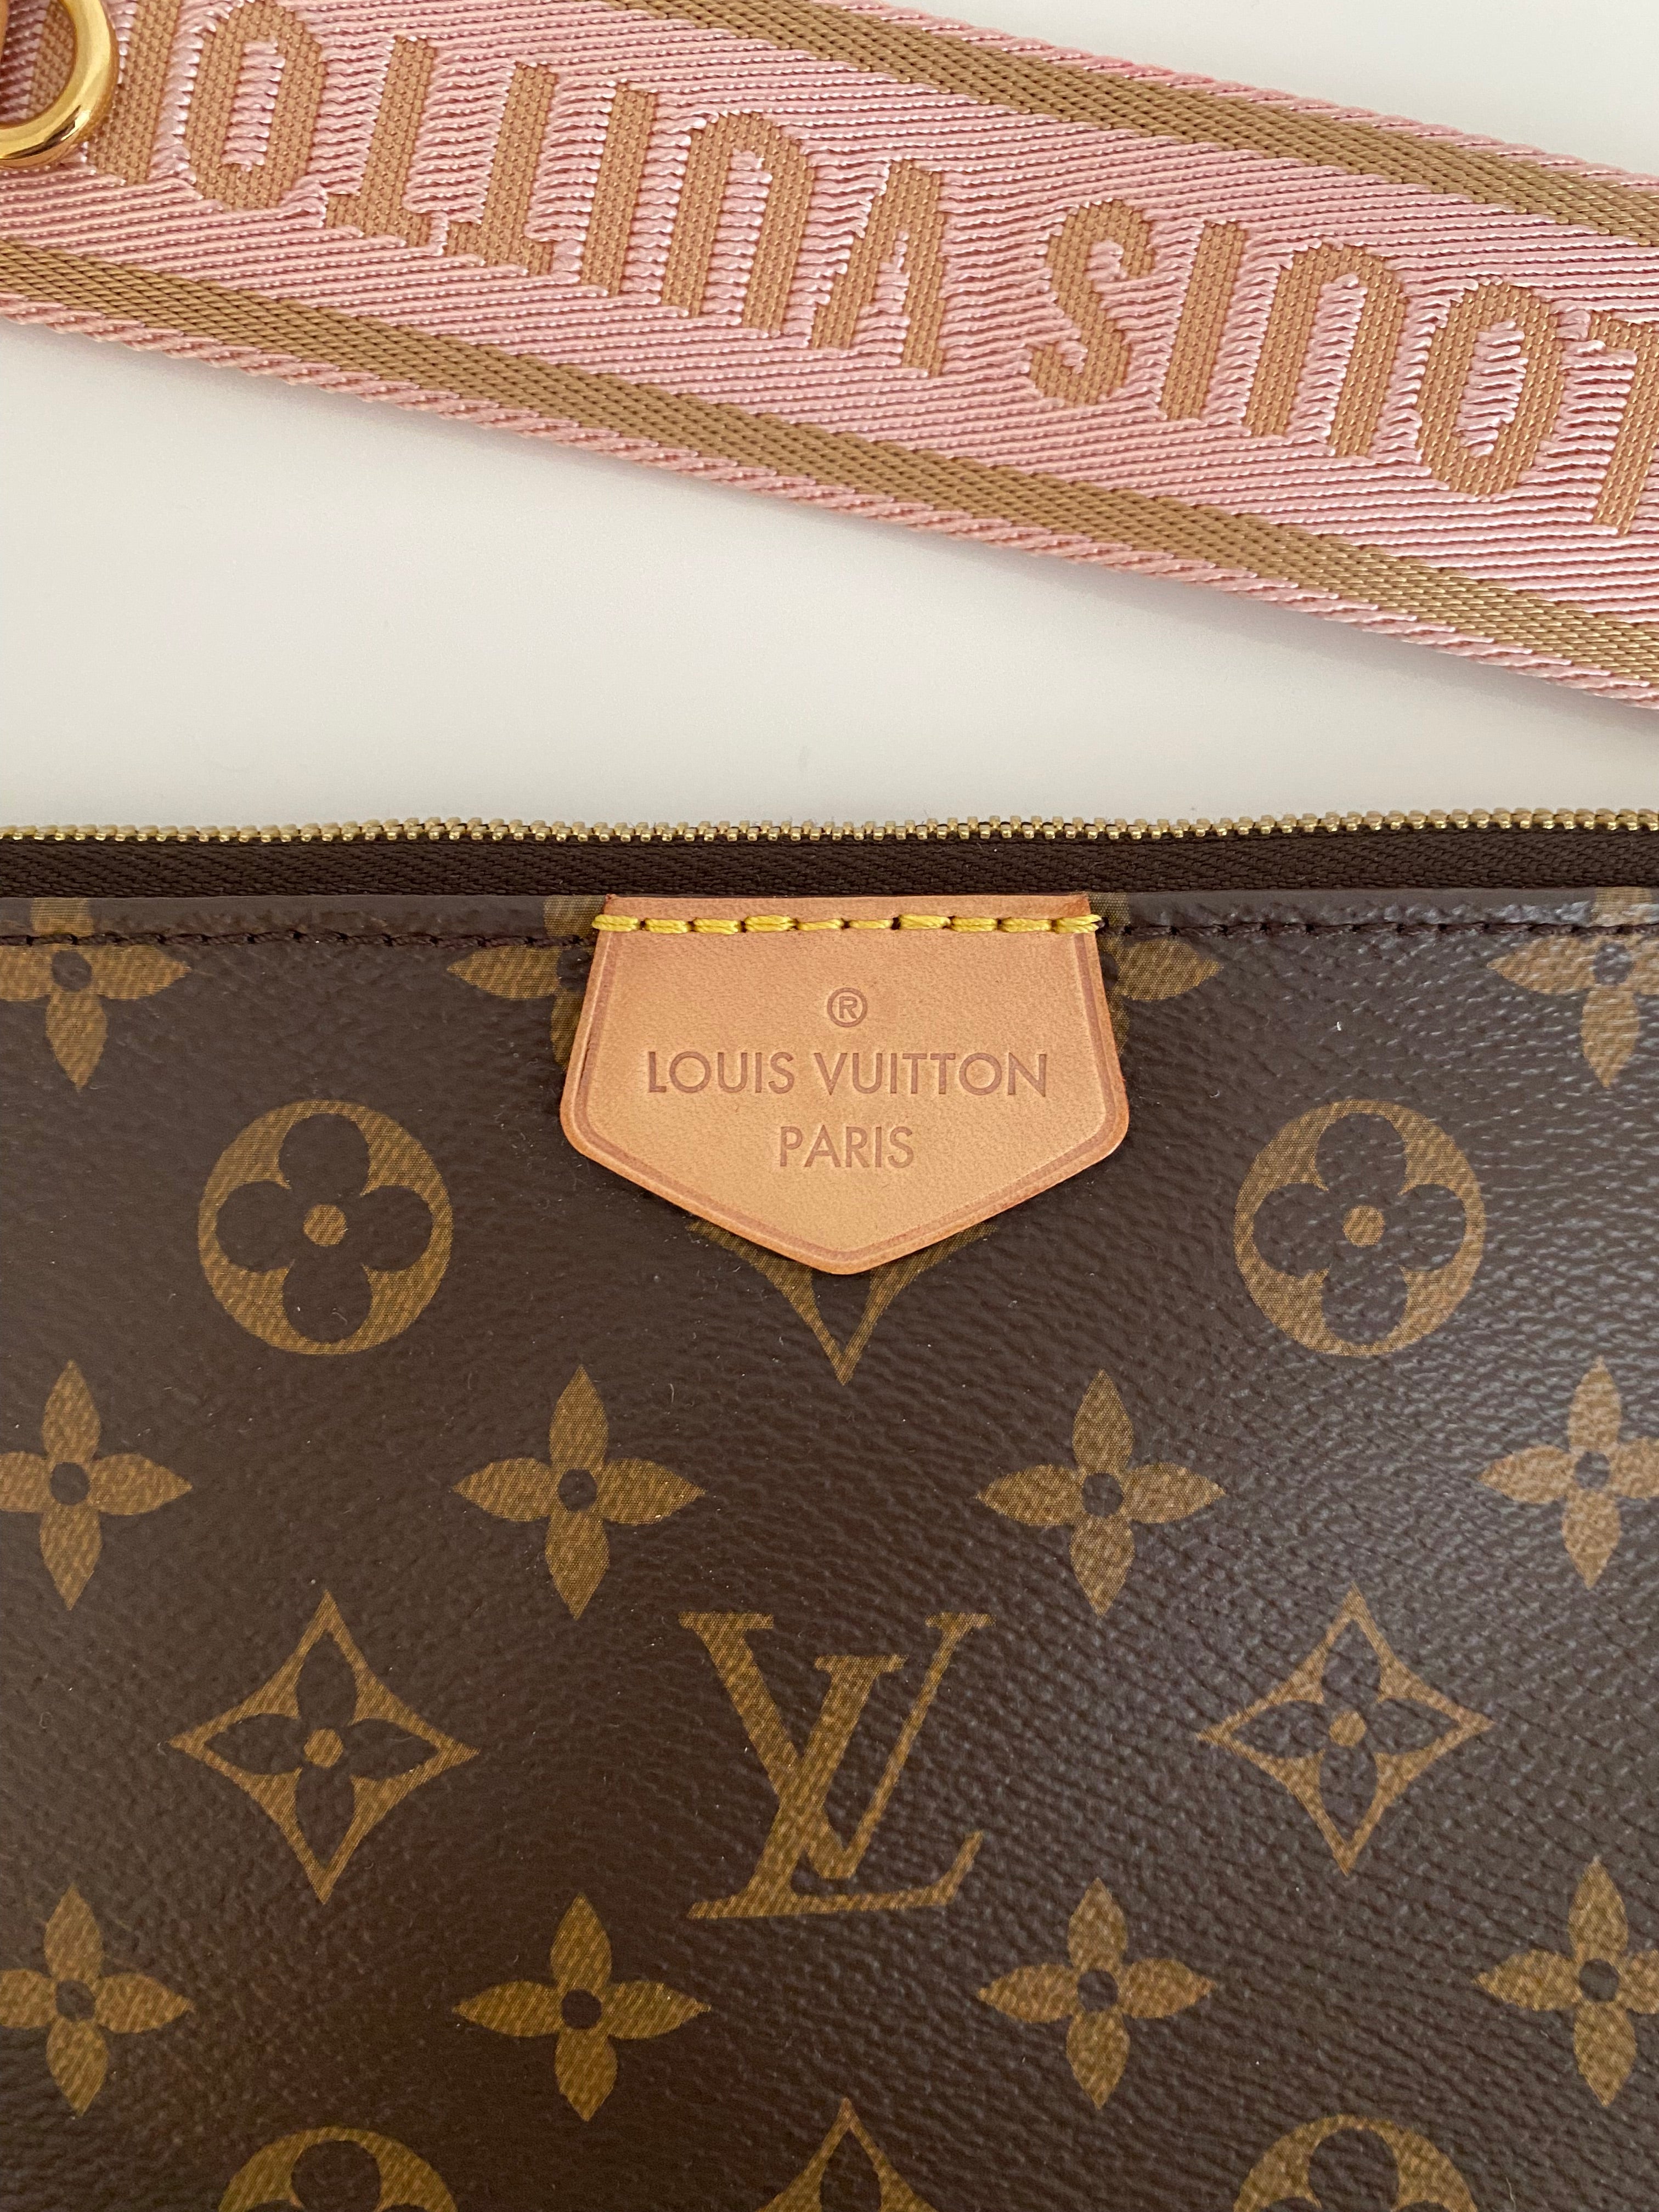 Louis Vuitton - A shared passion for daring, innovation and